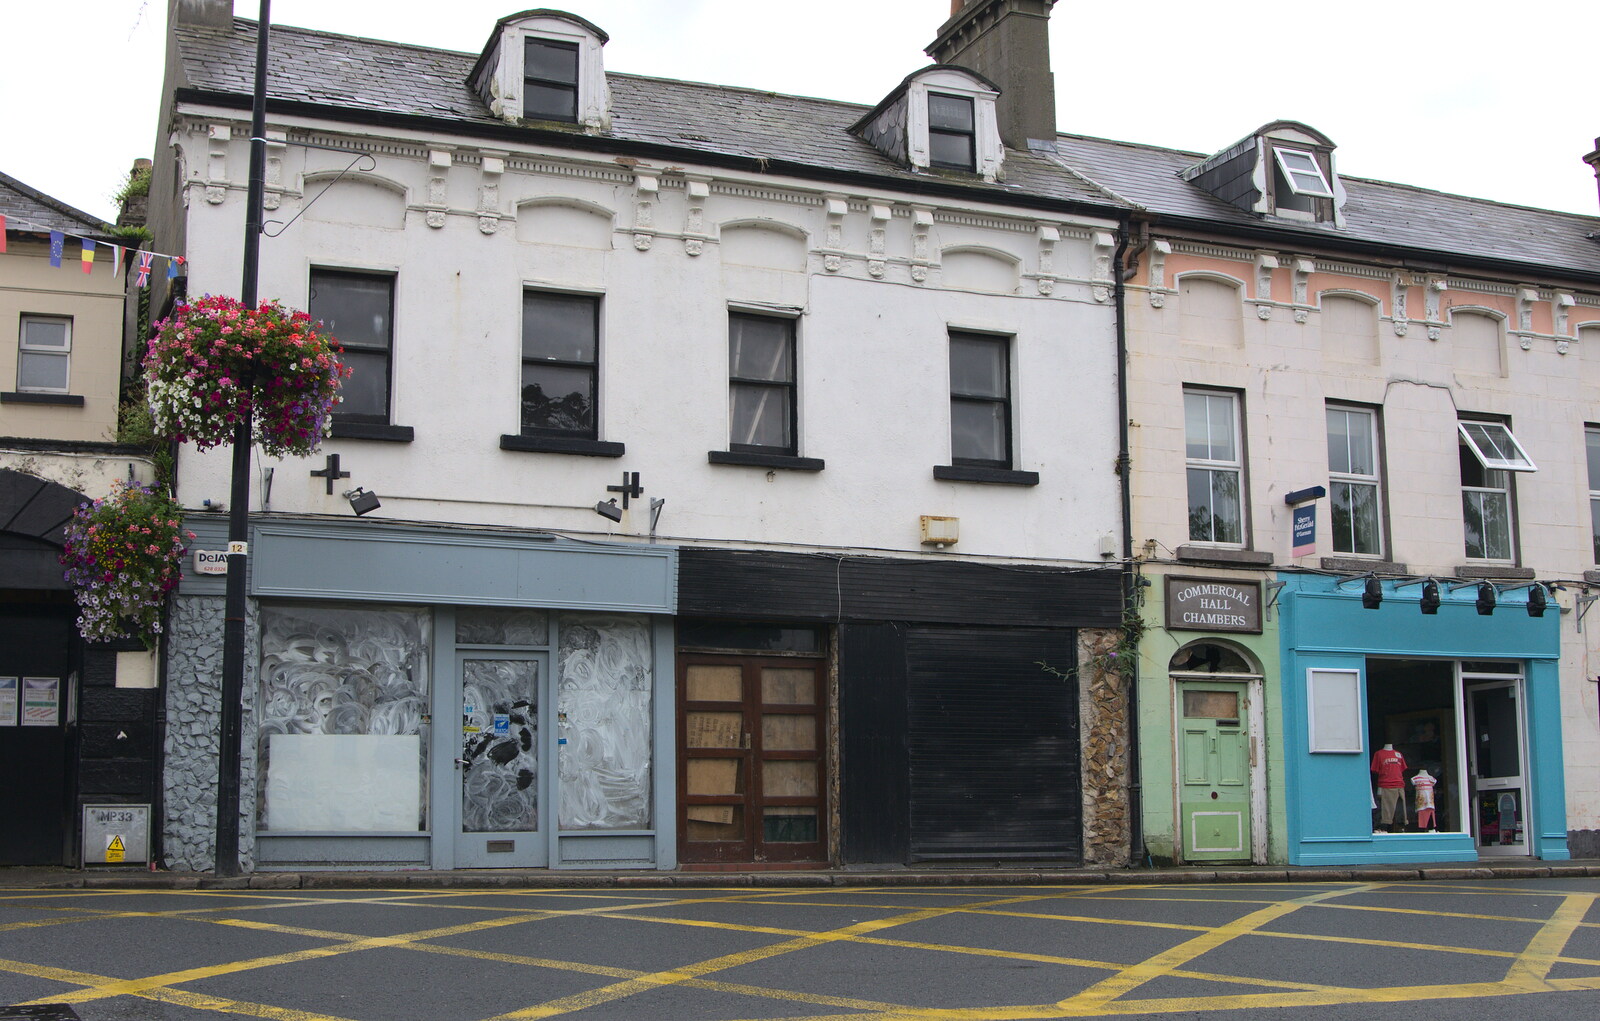 More closed-down shops from Camping at Silver Strand, Wicklow, County Wicklow, Ireland - 7th August 2014